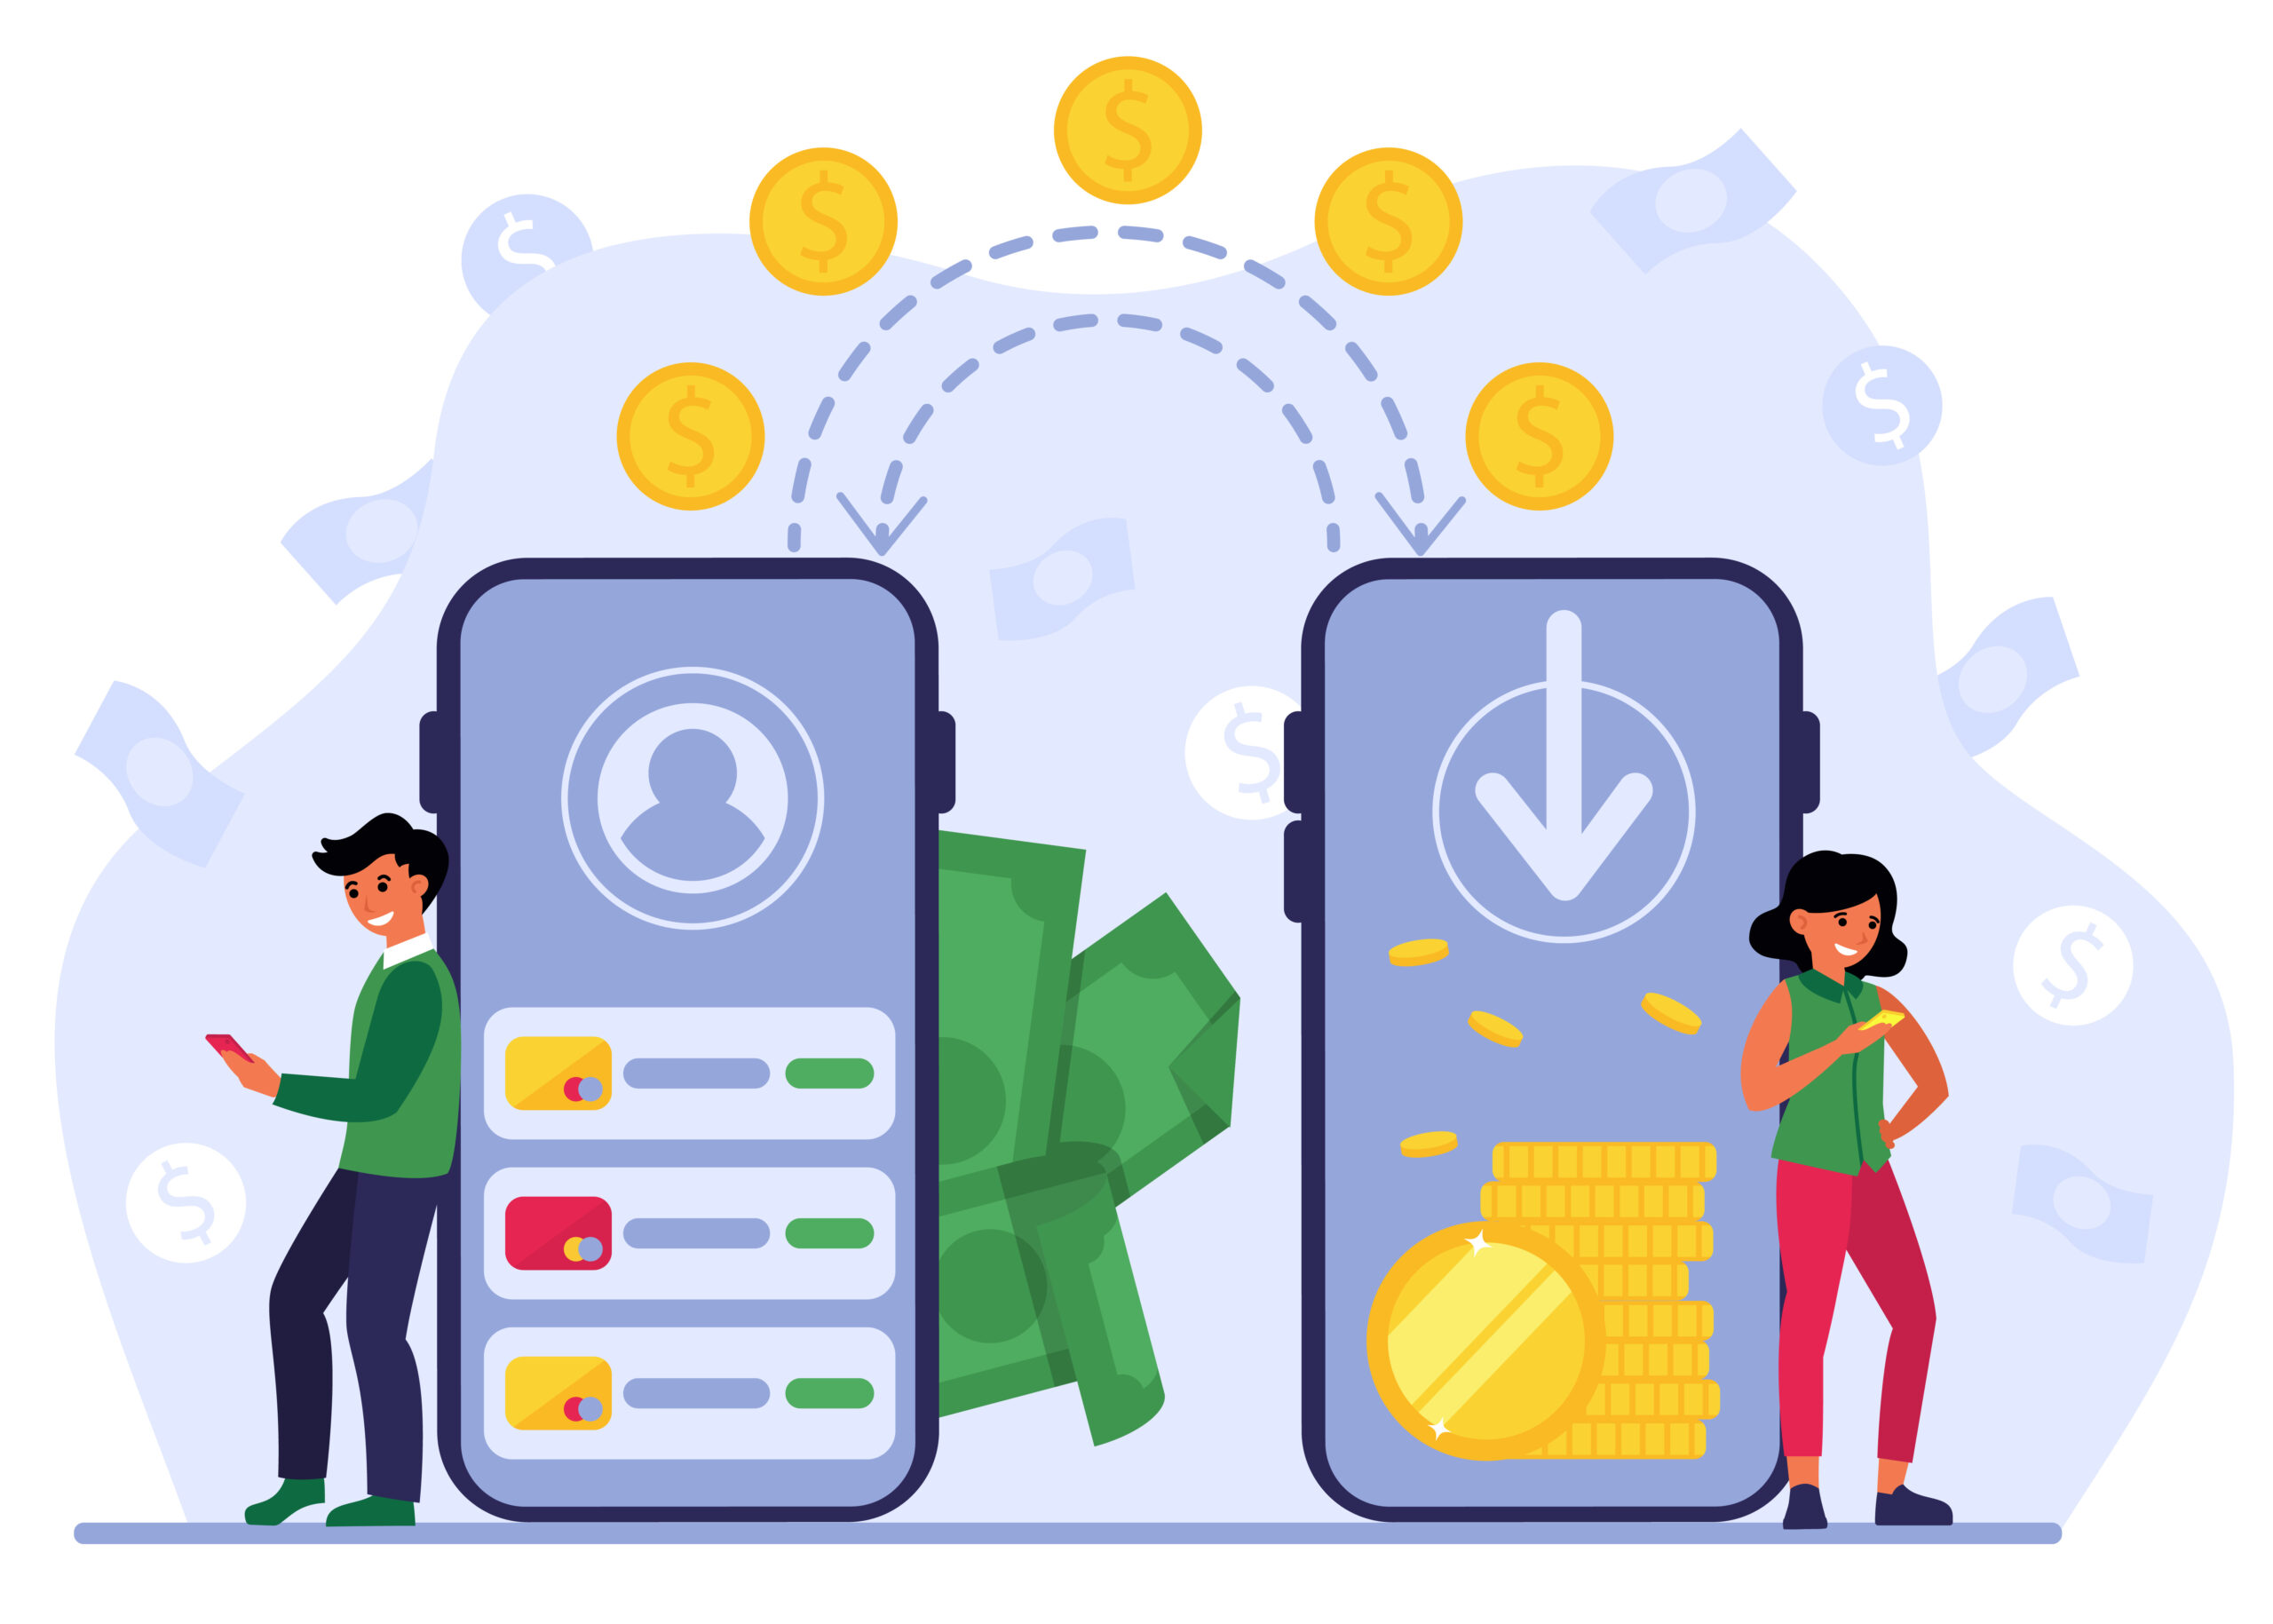 People using mobile bank for remittance of money. Man and woman with smartphones sending coins to each other. Vector illustration for cashless transactions, financial app, payment transfer concept